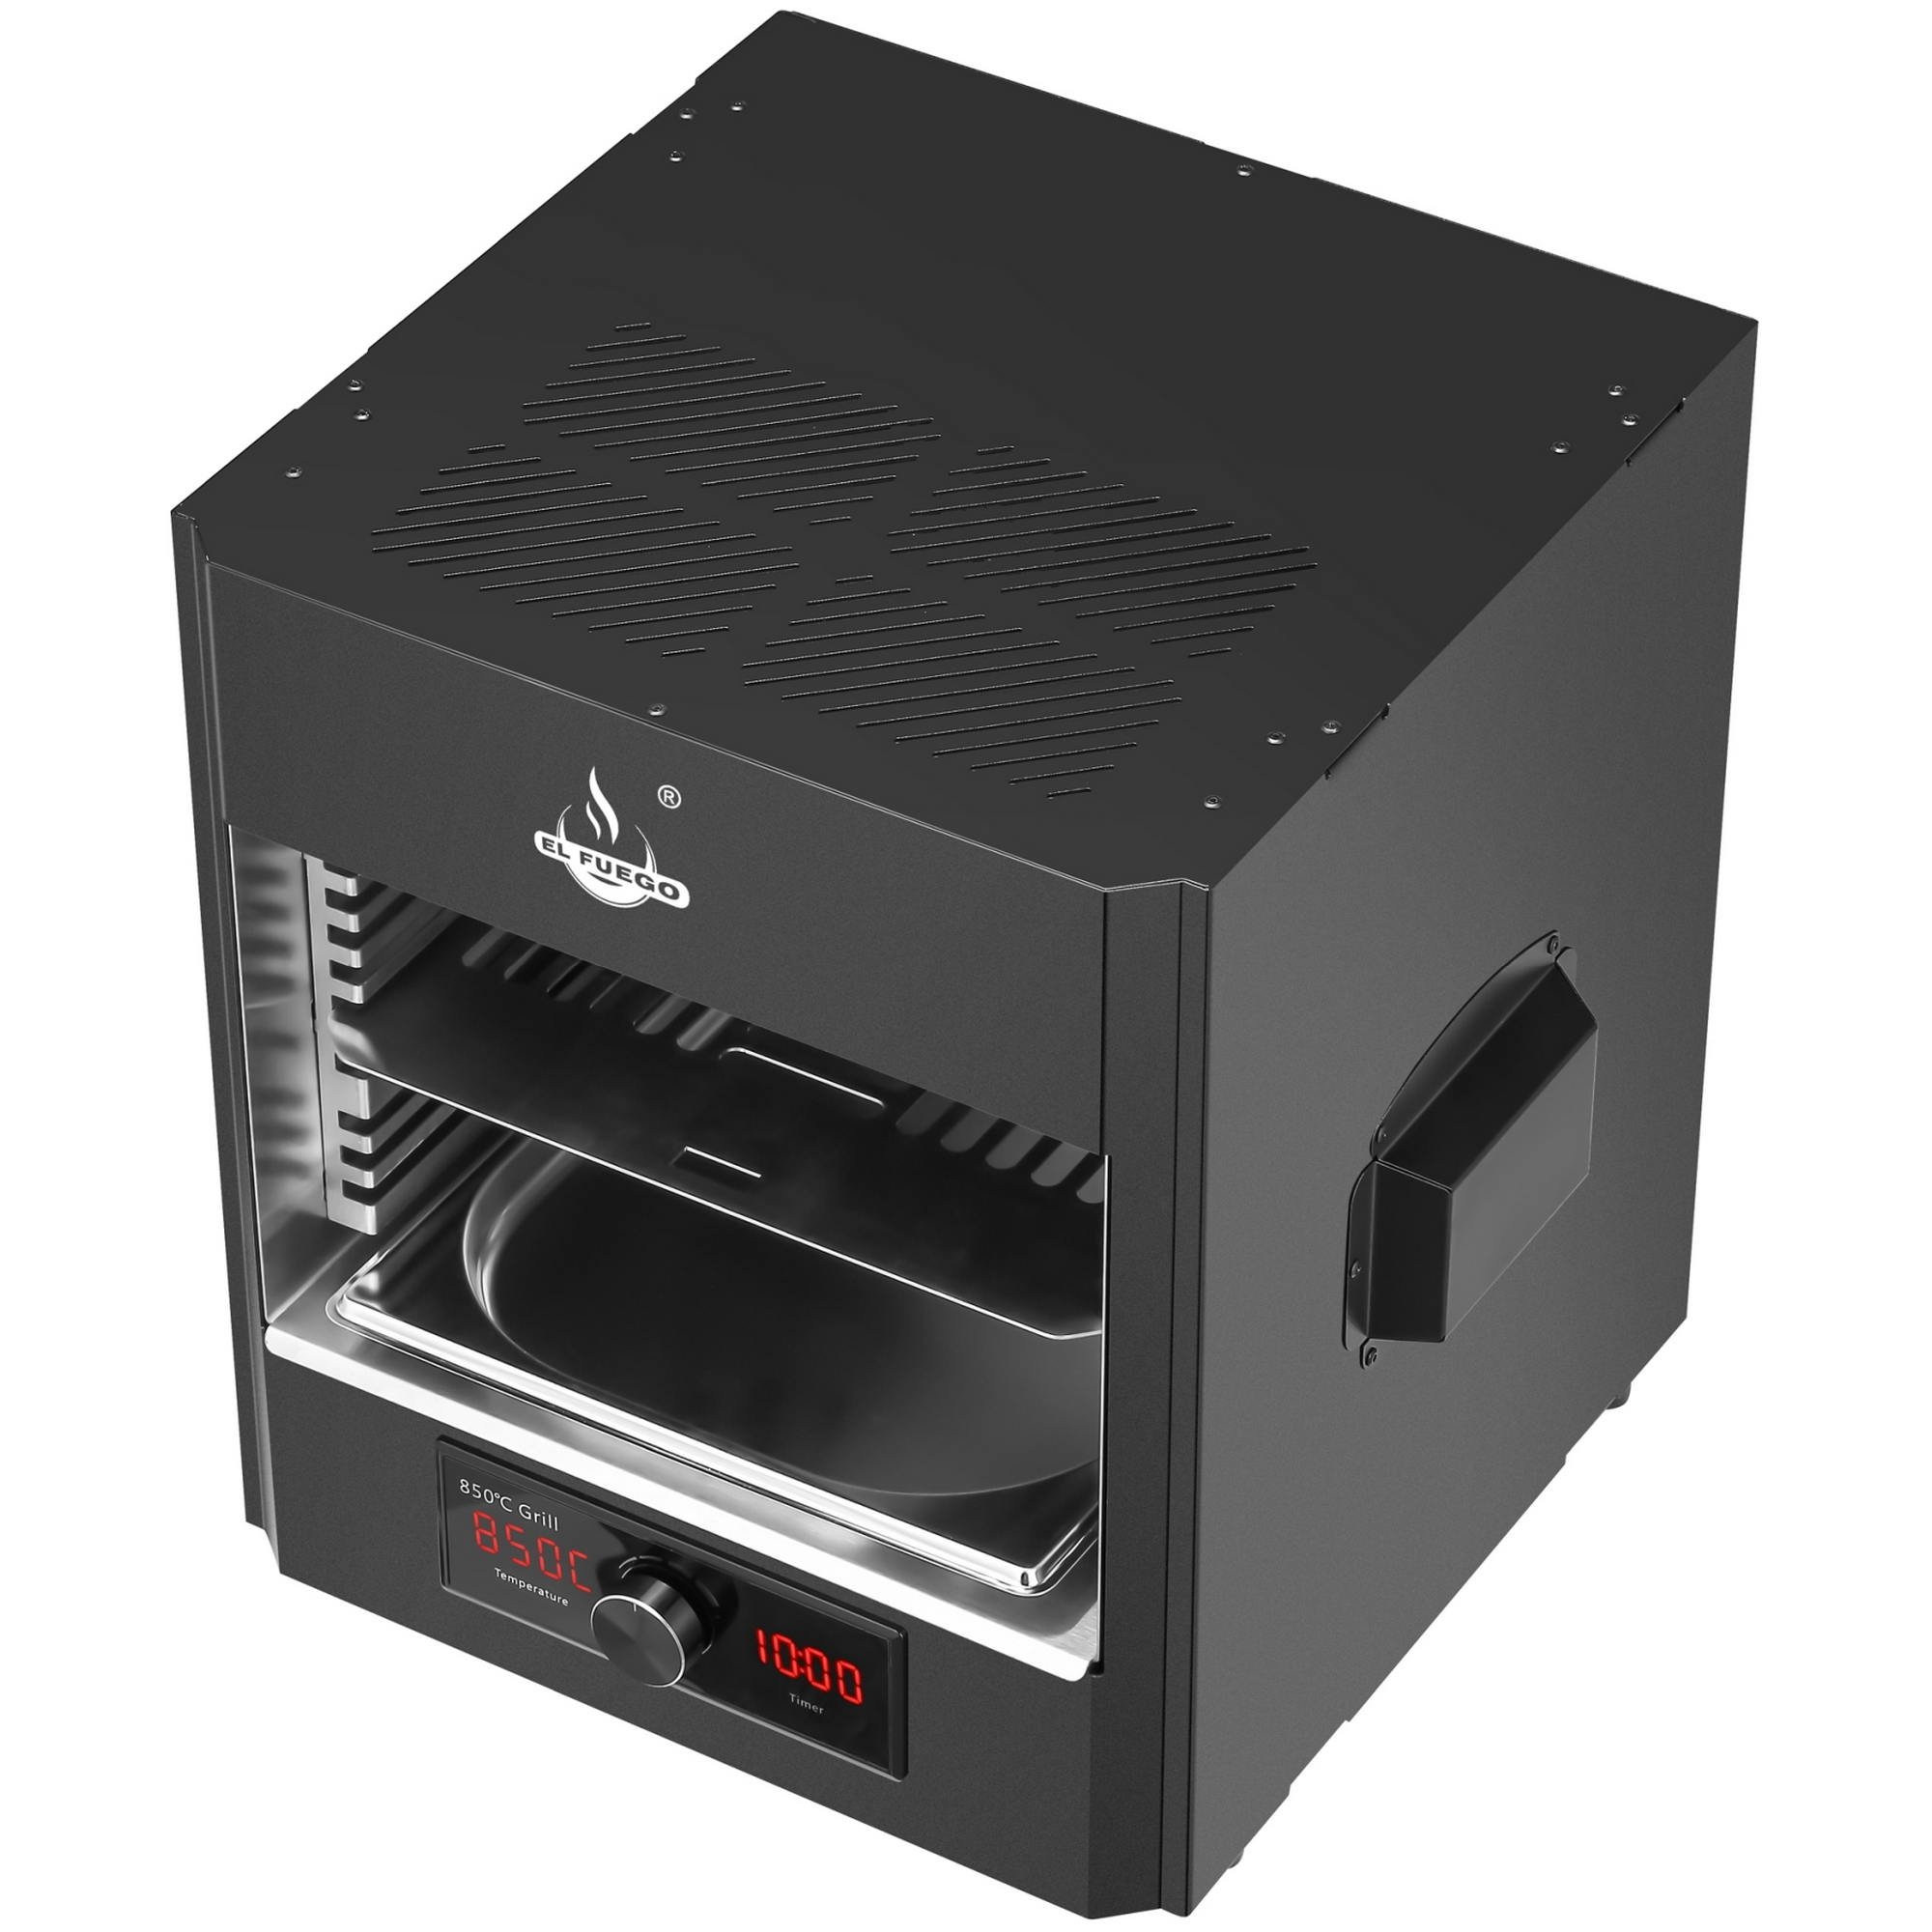 Elektrogrill 'Texas' schwarz + product picture